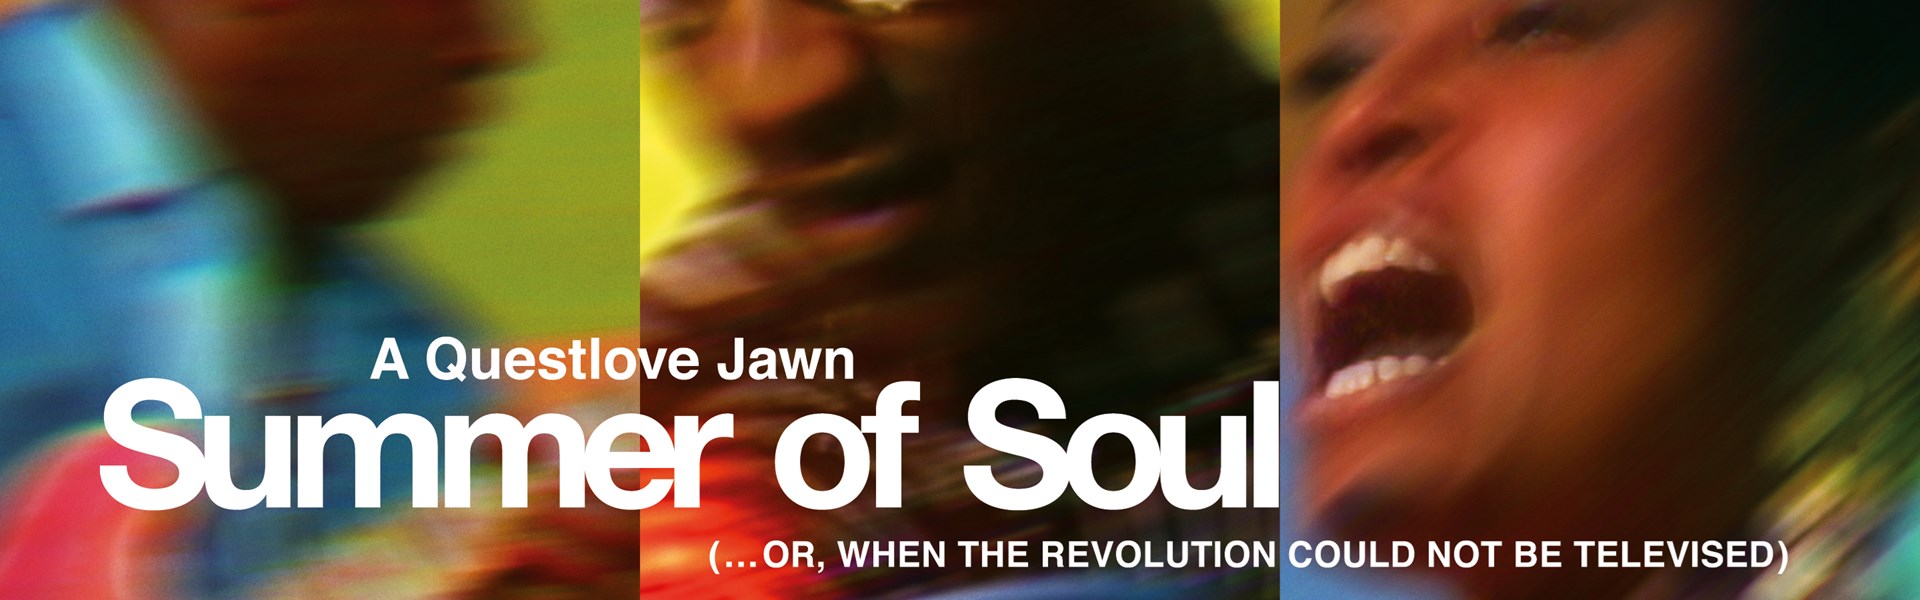 FILM: Summer of Soul (...Or, When the Revolution Could Not Be Televised) (12A)